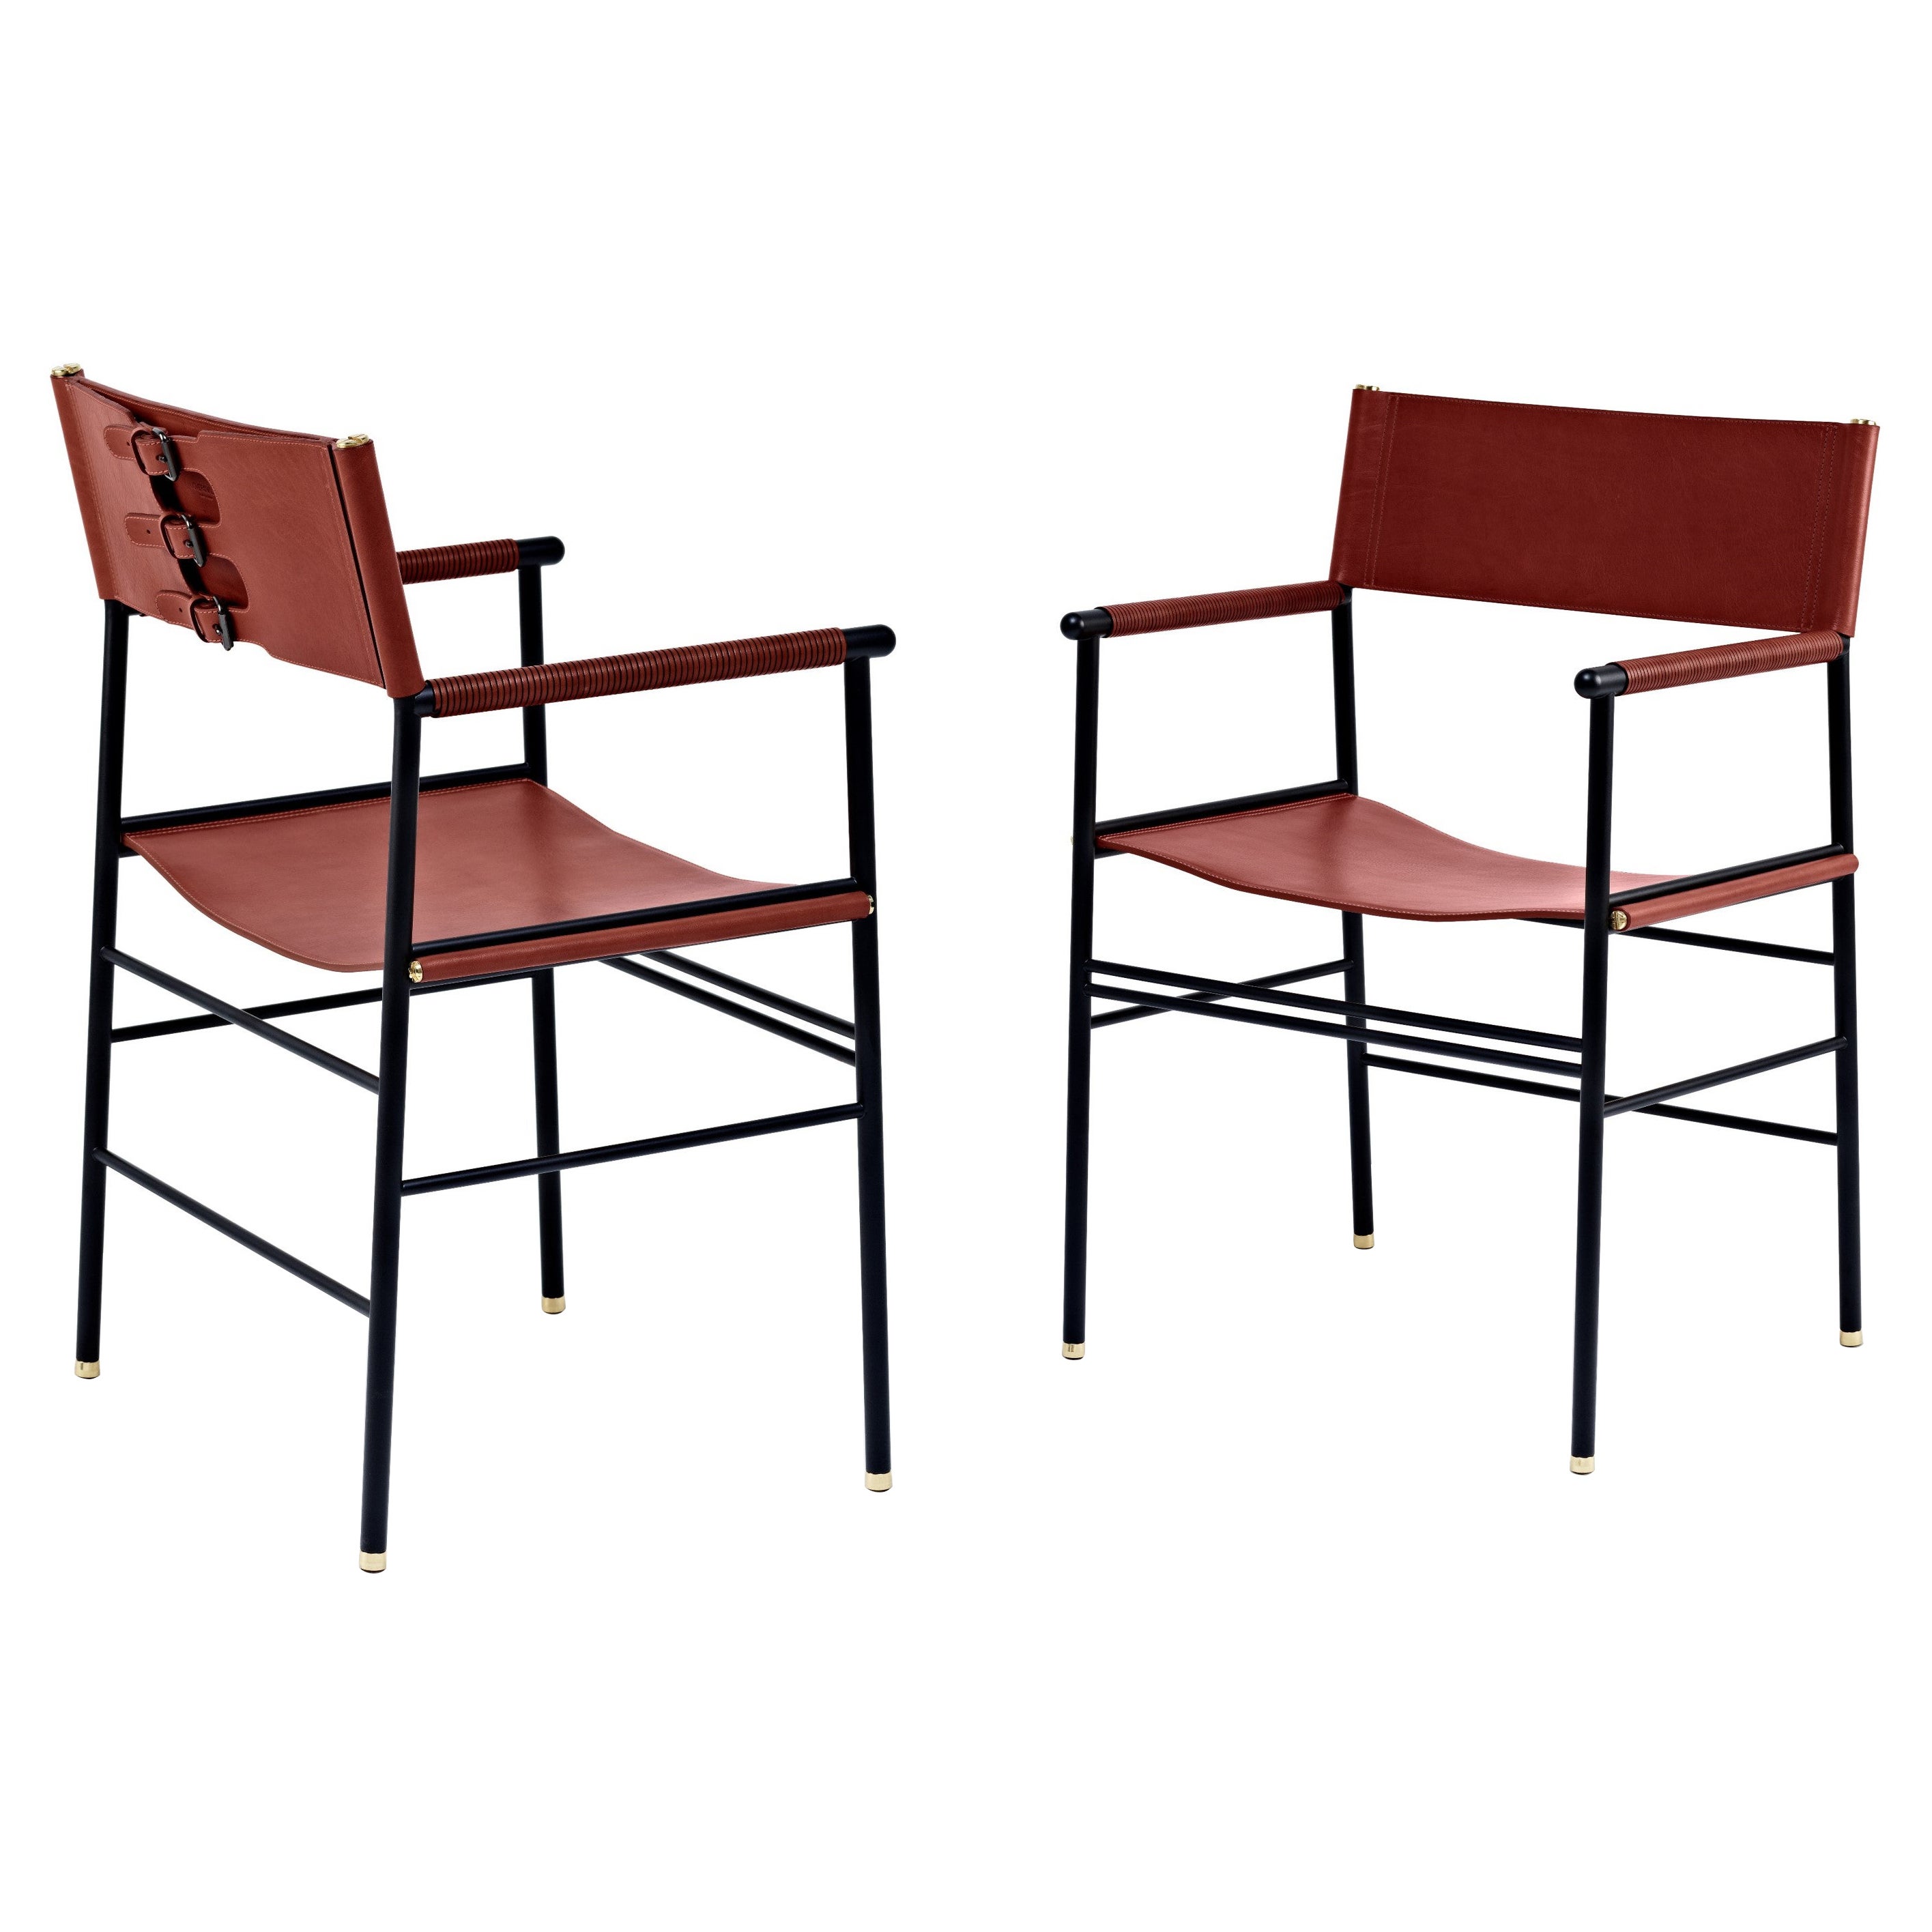 Set of 2 Handmade Contemporary Chair Cognac Leather & Black Rubbered Metal